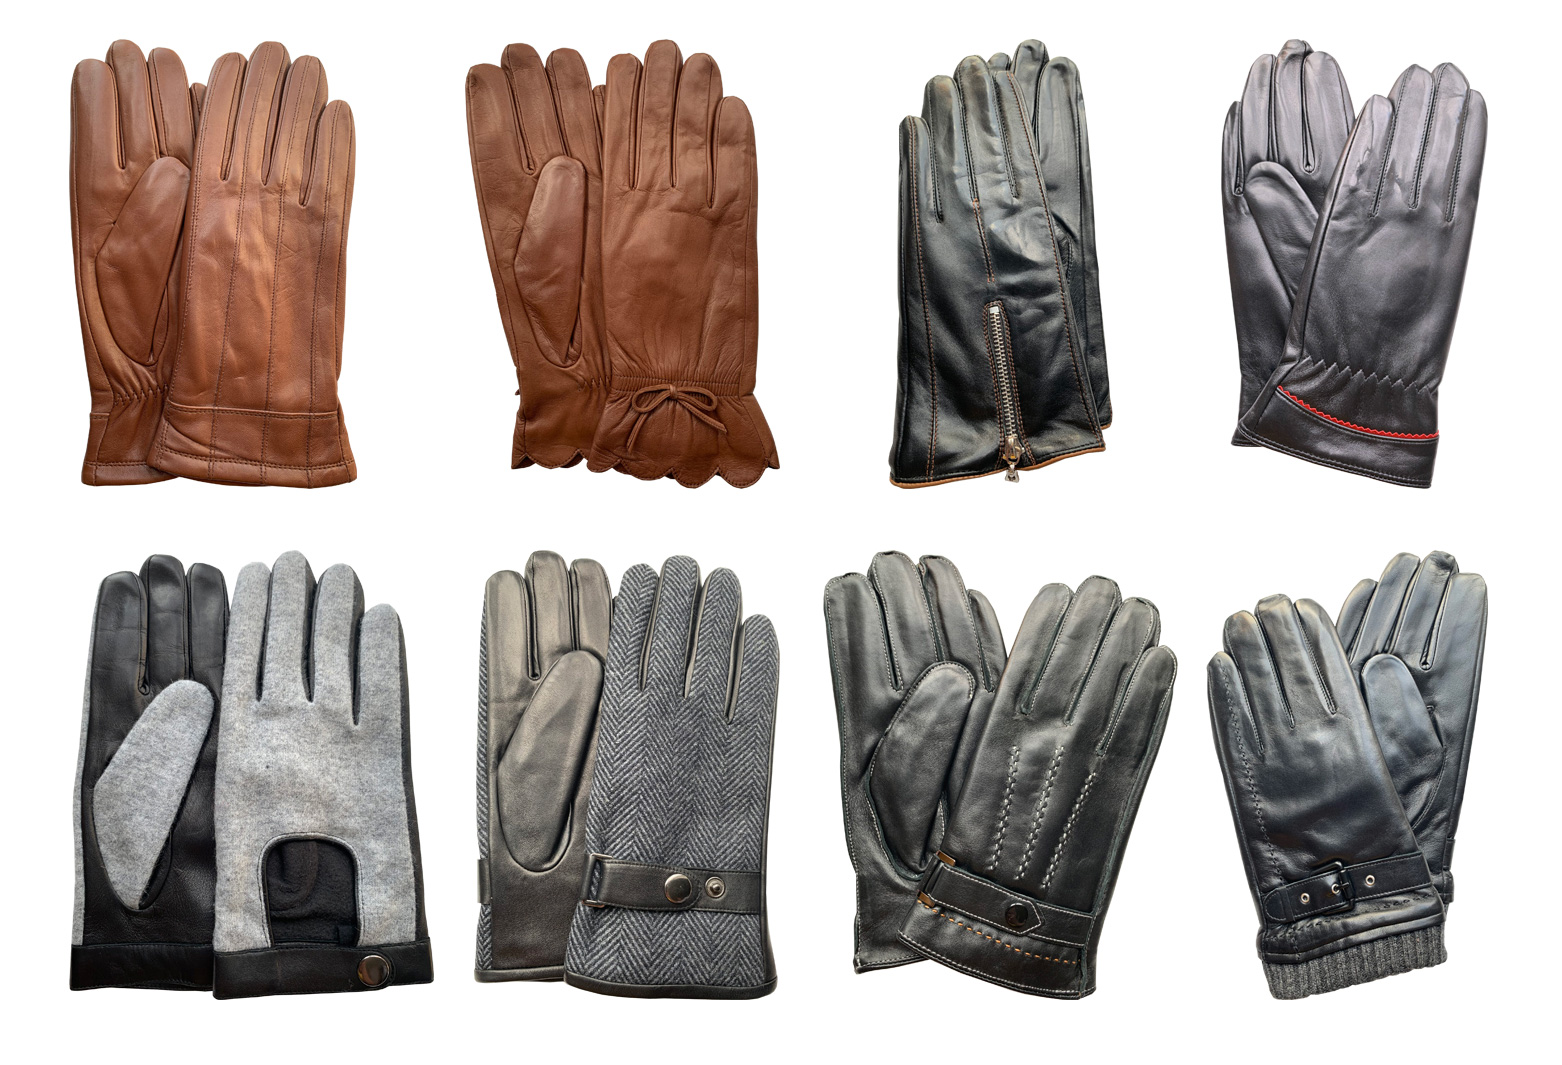 Image is a photograph showing the 8 different designs of Hands of Warriors leather wheelchair gloves available for sale at Disability Horizons